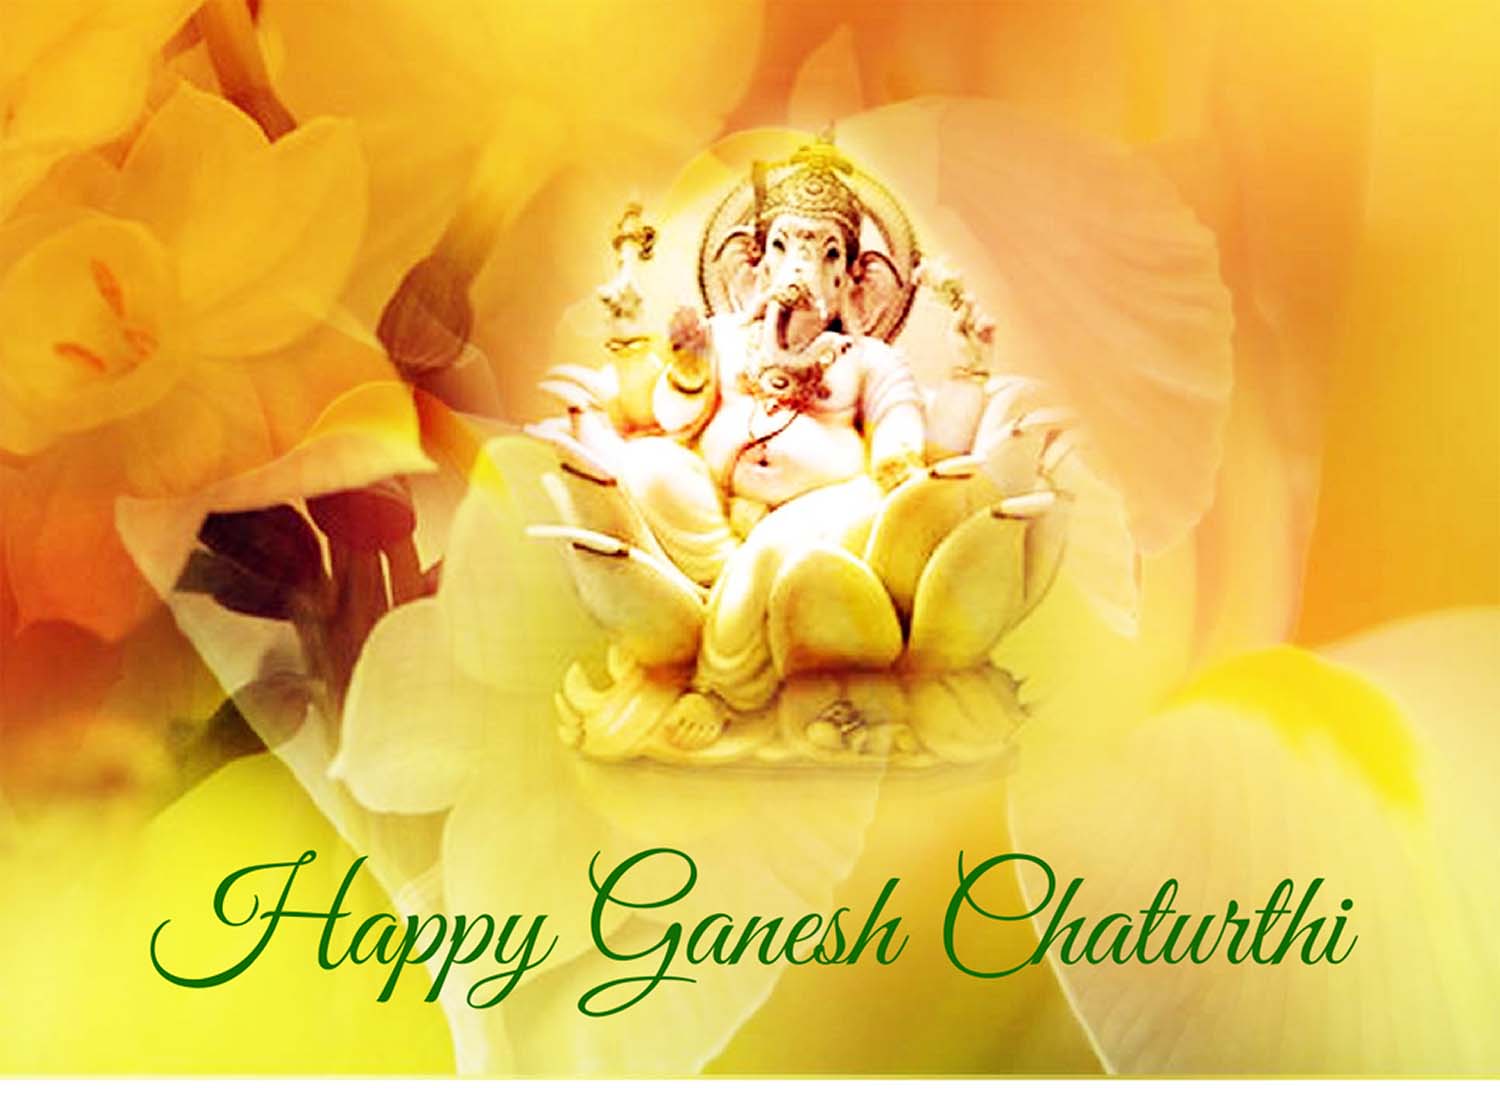 Lovely Happy Ganesh Chaturthi wallpaper in flowers!